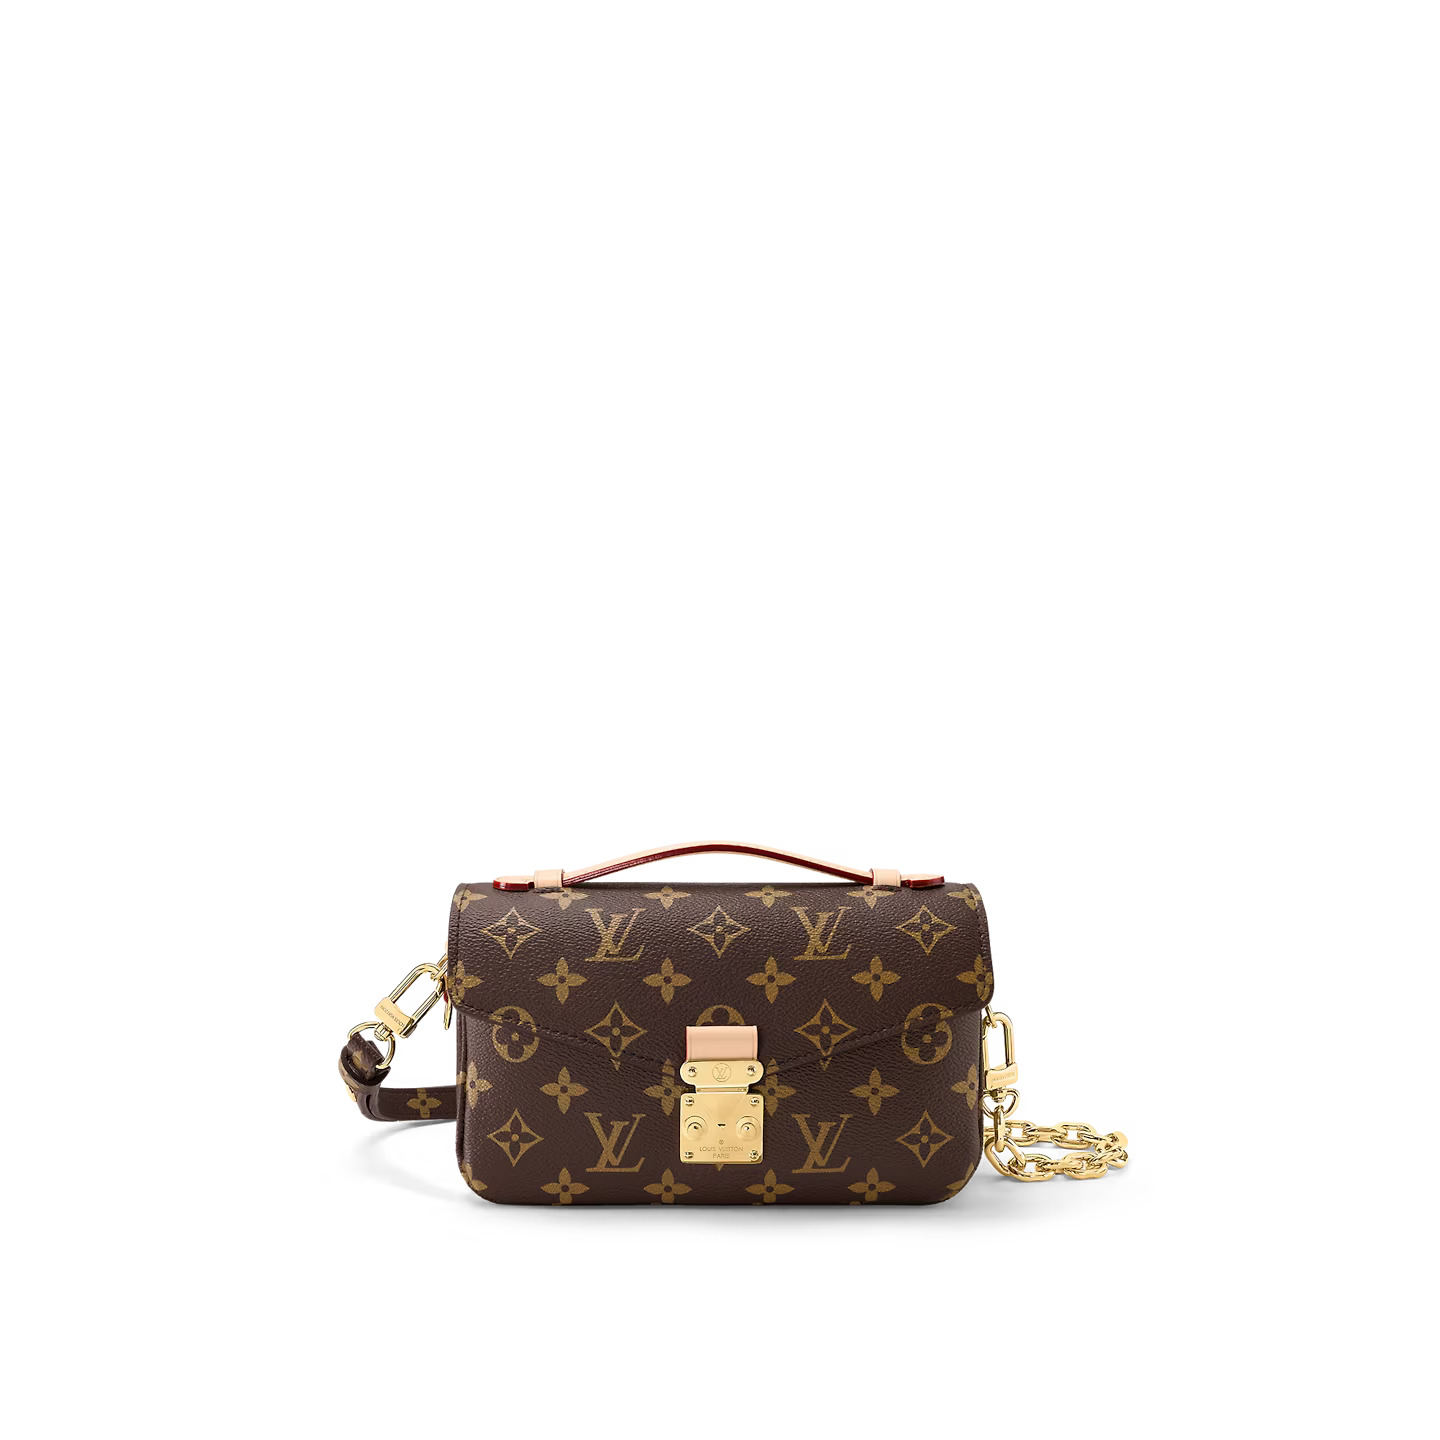 Louis Vuitton OnTheGo East West Monogram in Giant Monogram and